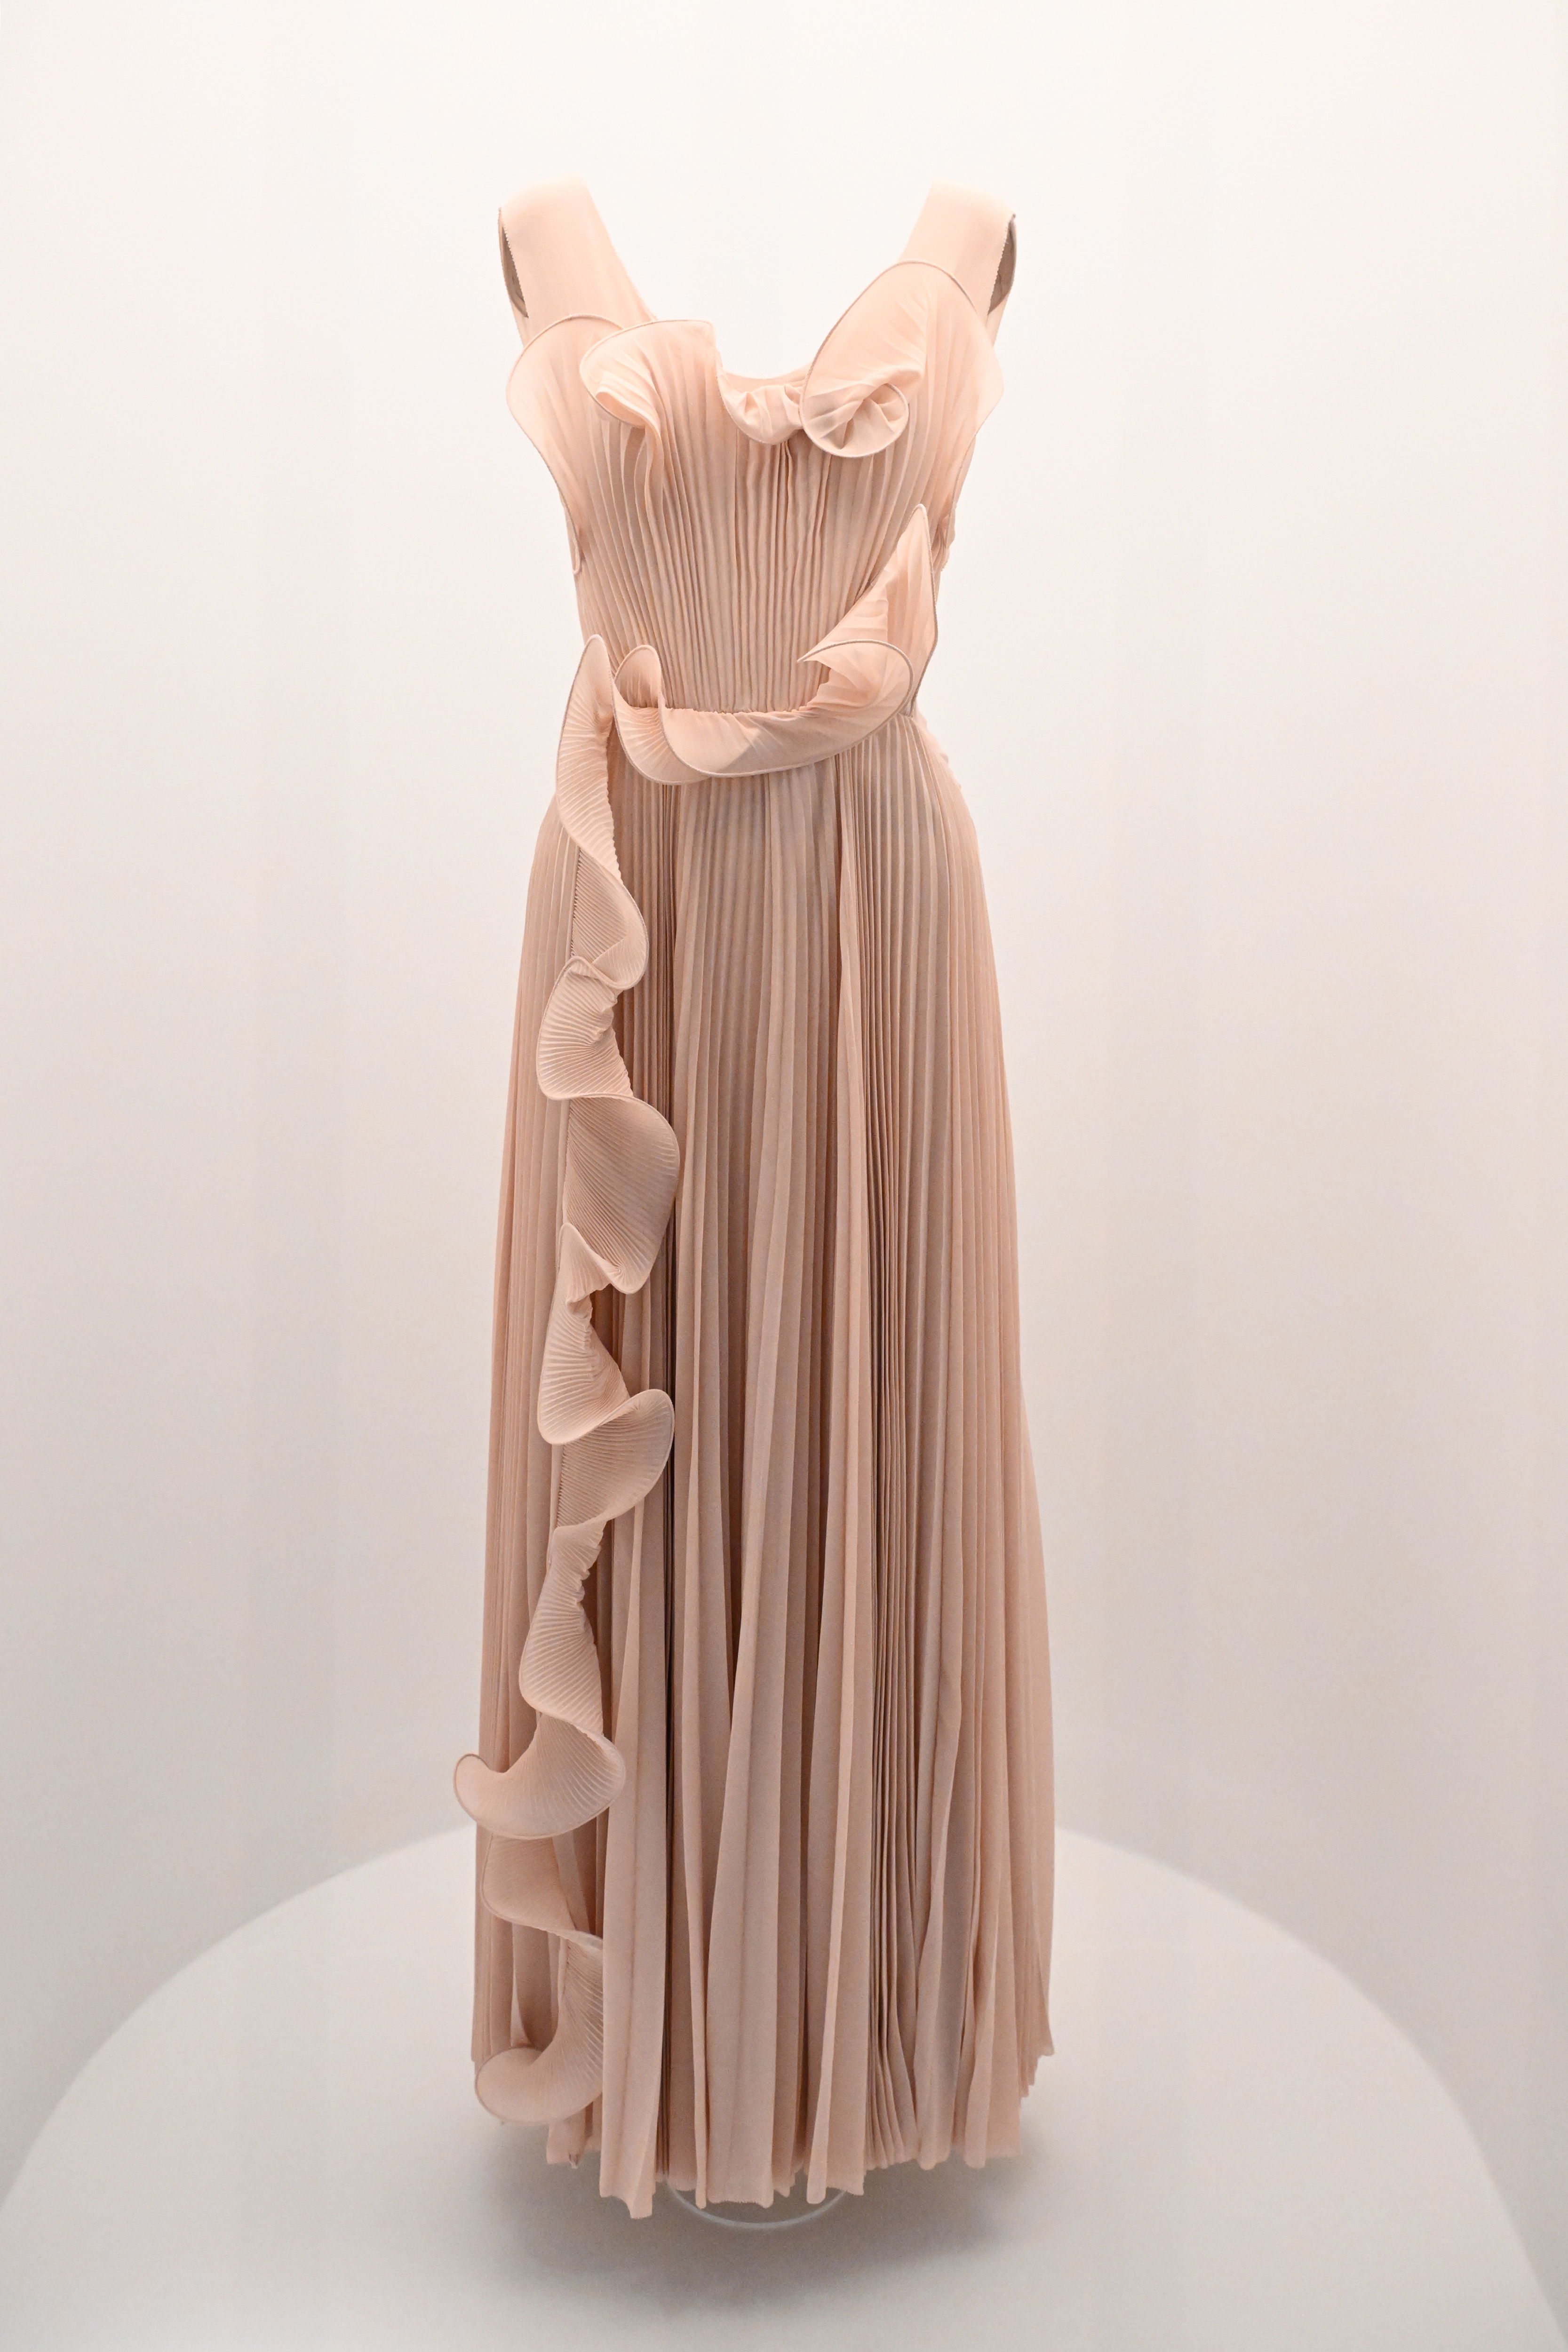 Elegant pleated evening gown with bow detail on bodice and ruffled trim, displayed on mannequin